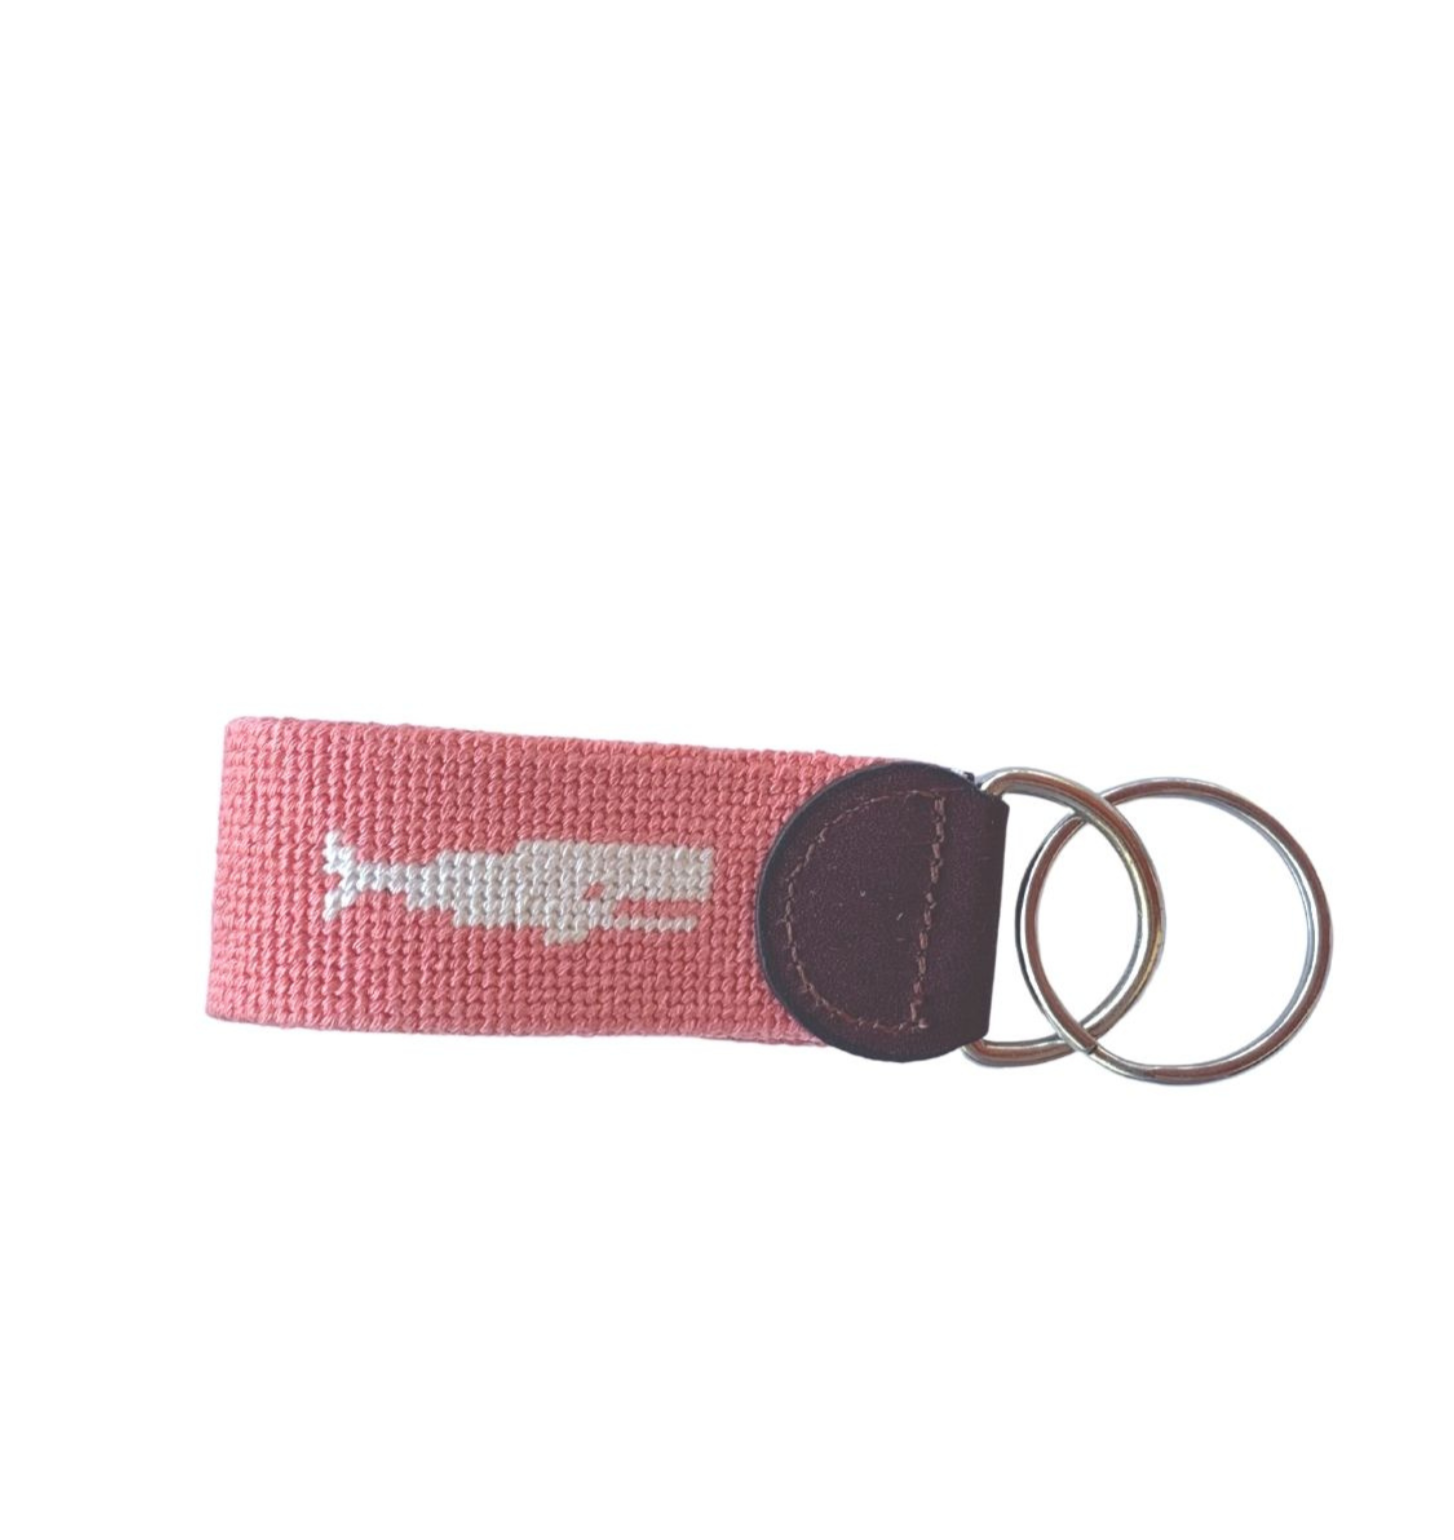 Needlepoint Key Fob- Whale Design (on both sides) Hand Stitched